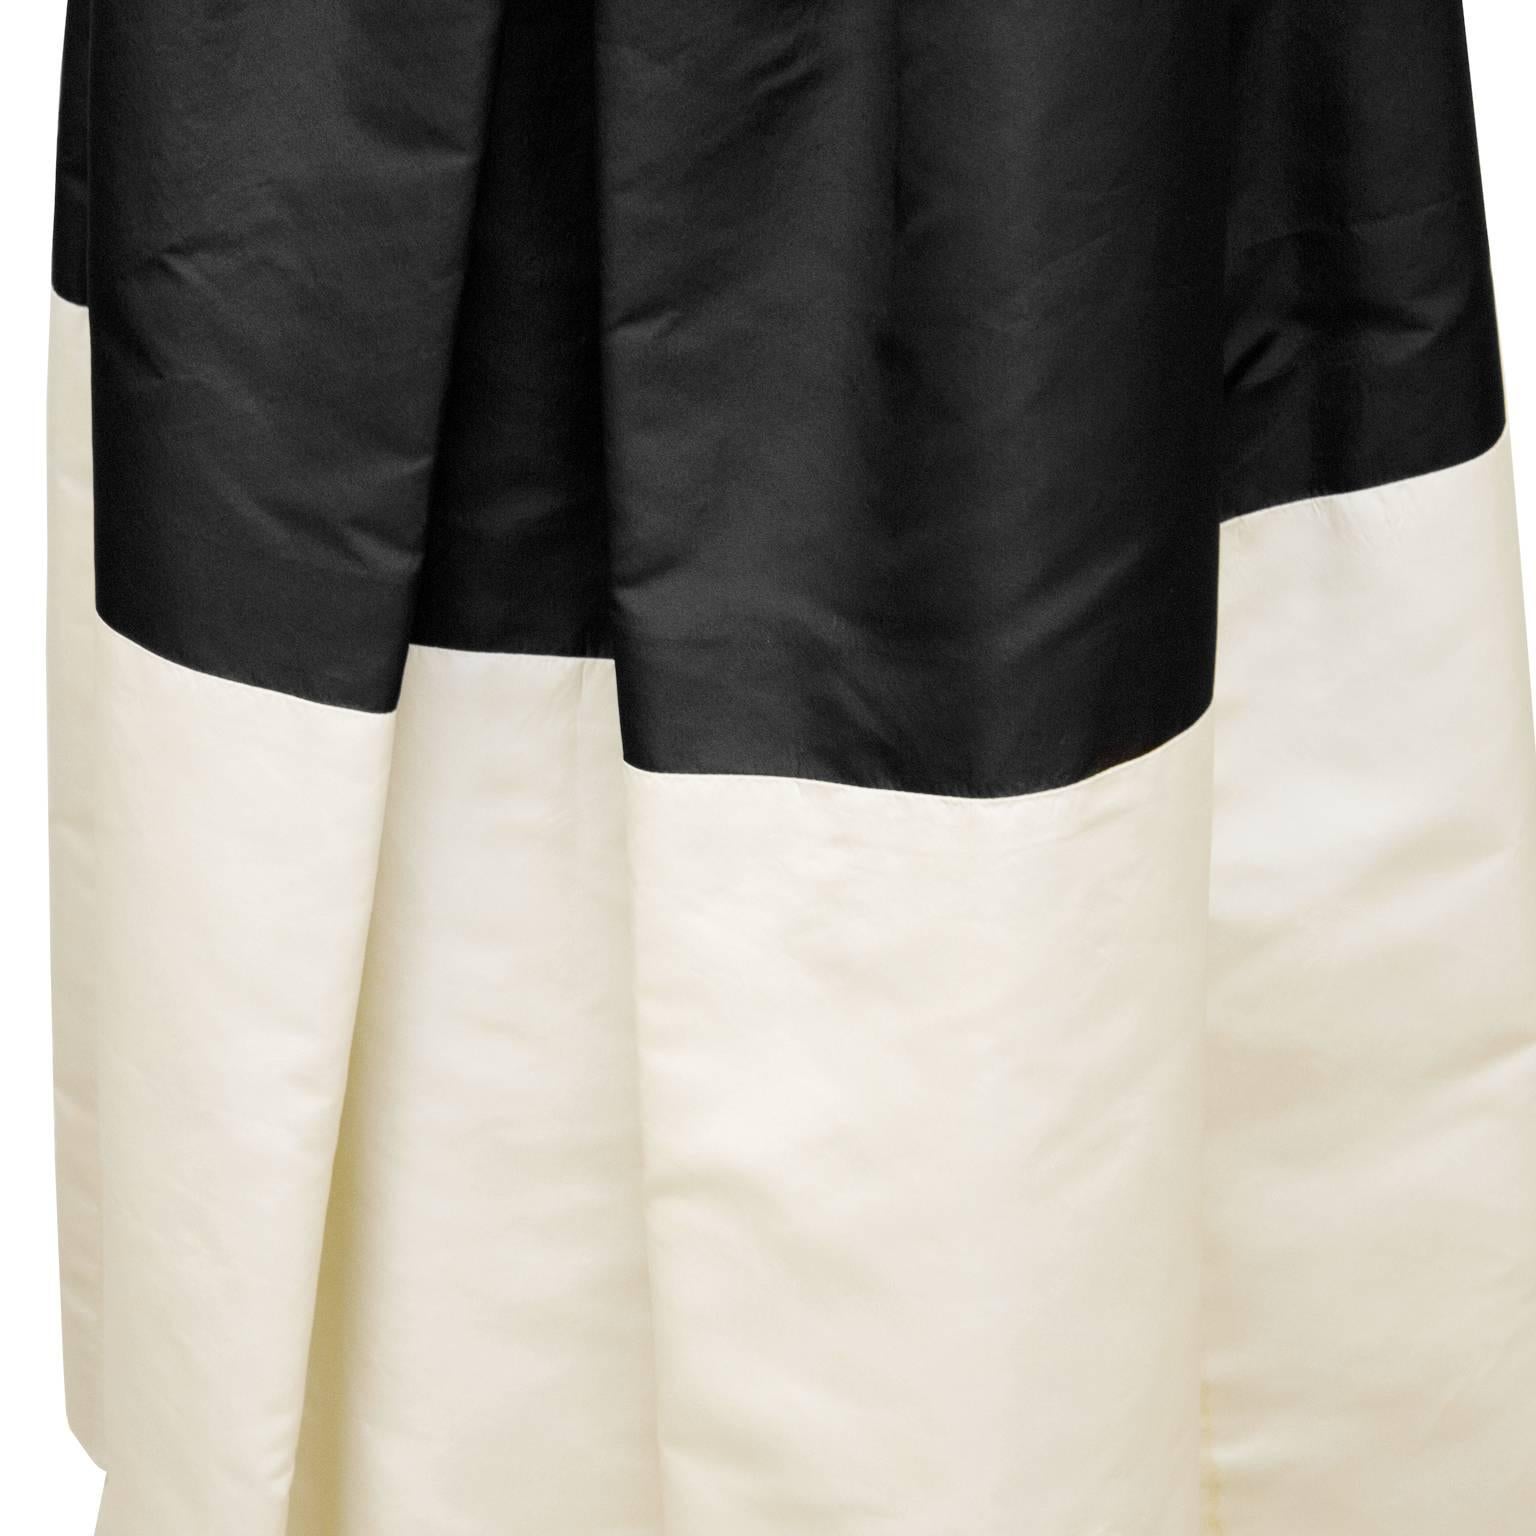 White Pauline Trigere Early 1960's Black and Cream Silk Taffeta Strapless Gown For Sale